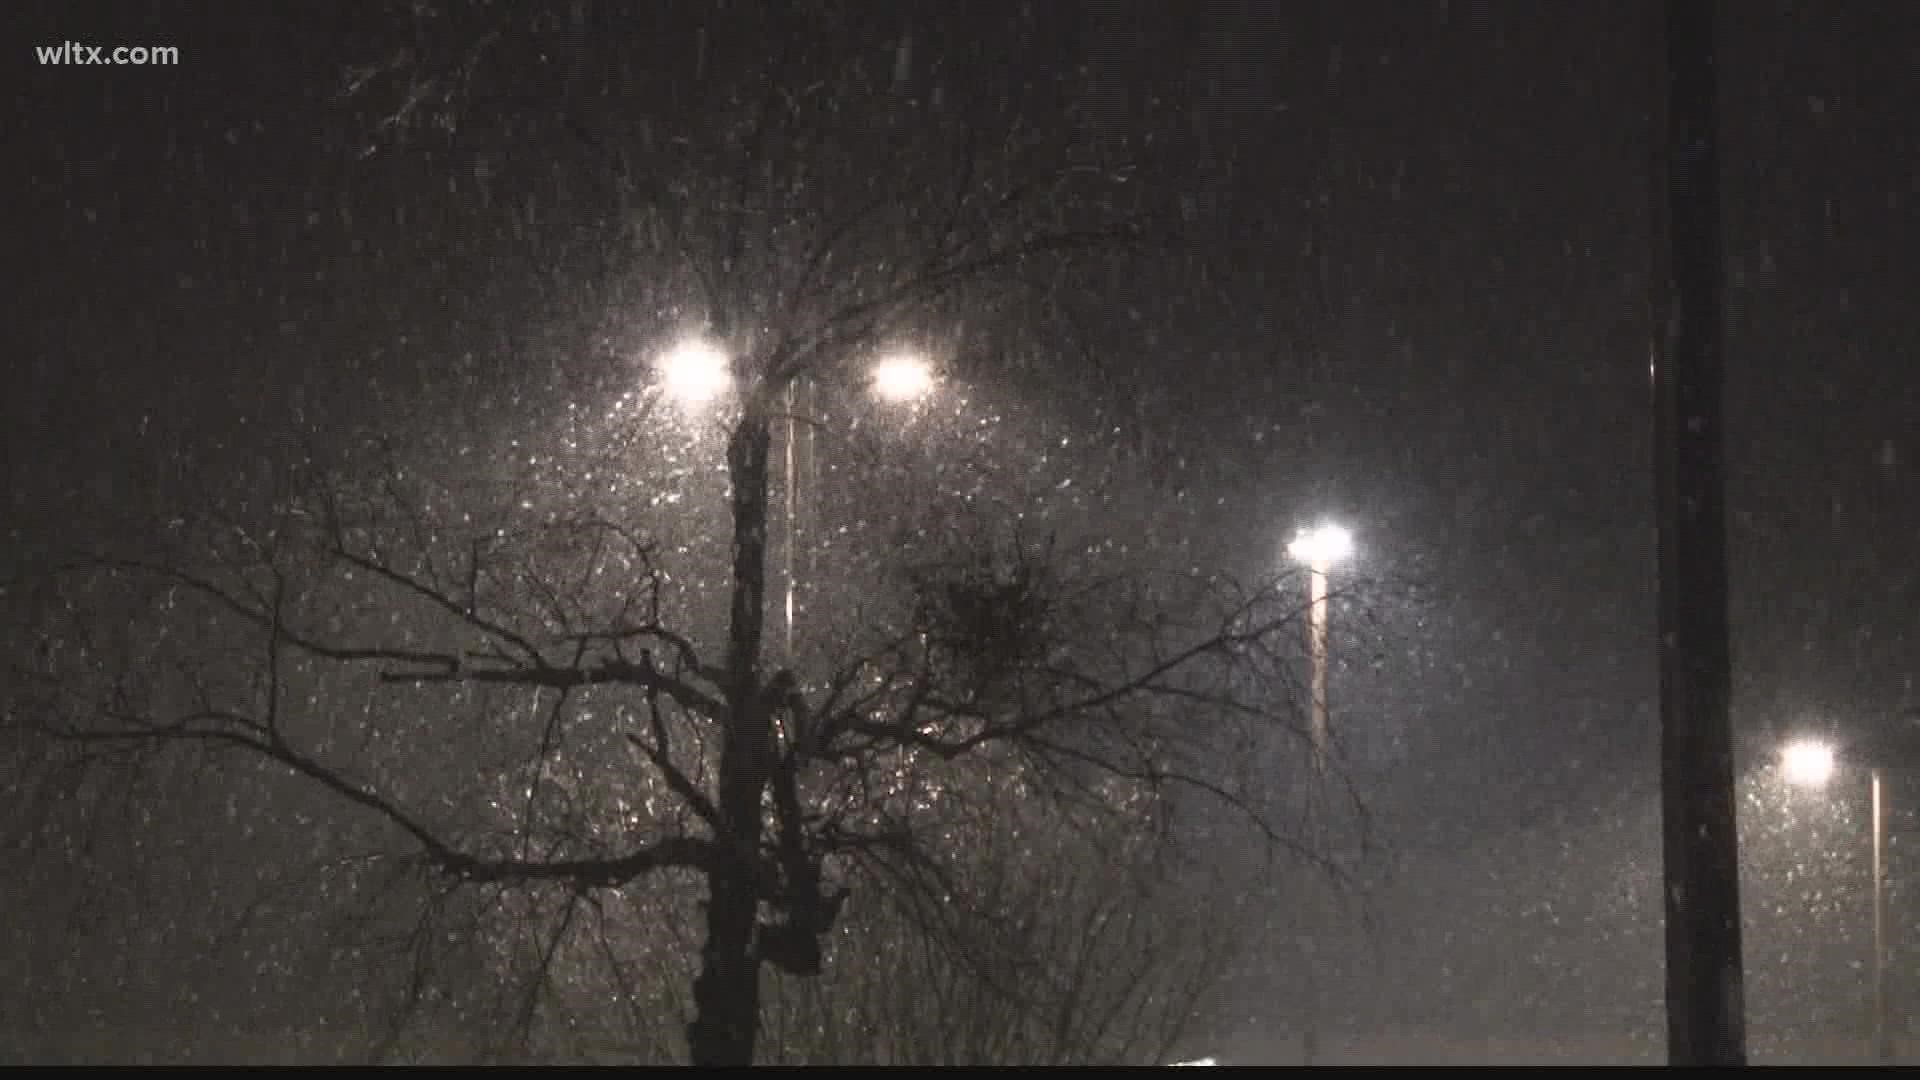 News19 Meteorologist Cory Smith looks back at why January is historically a snowy month for the Midlands.